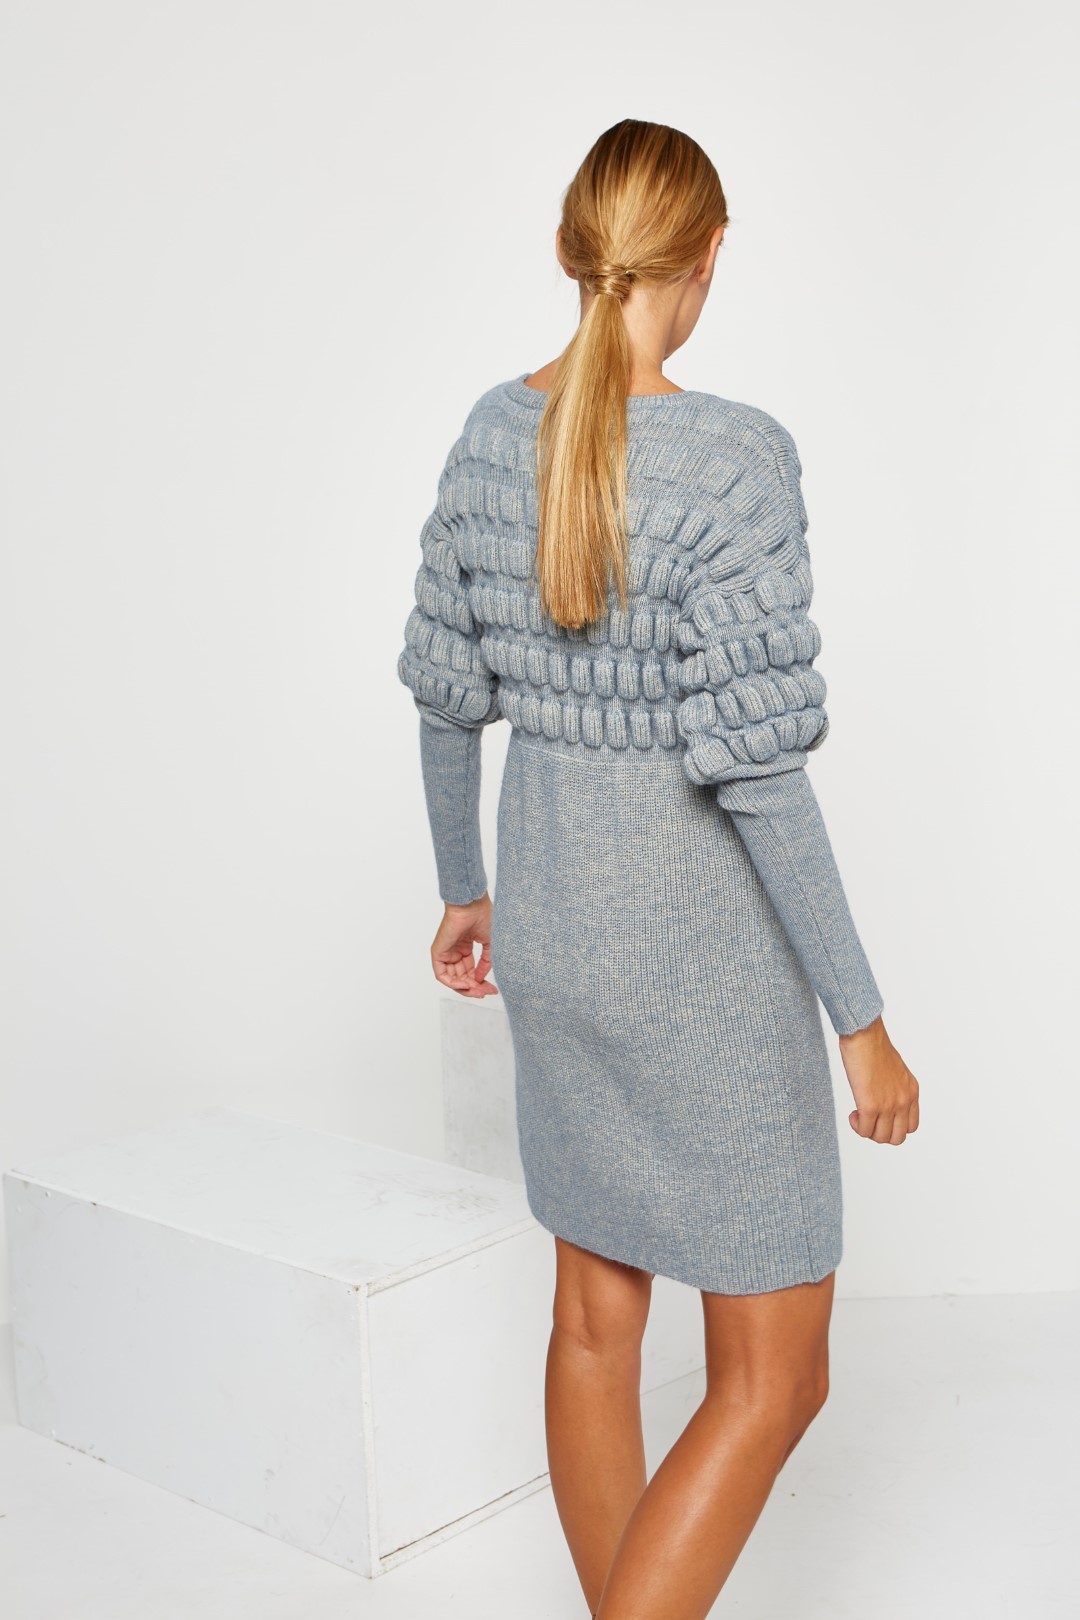 Short knit dress with puffy texture